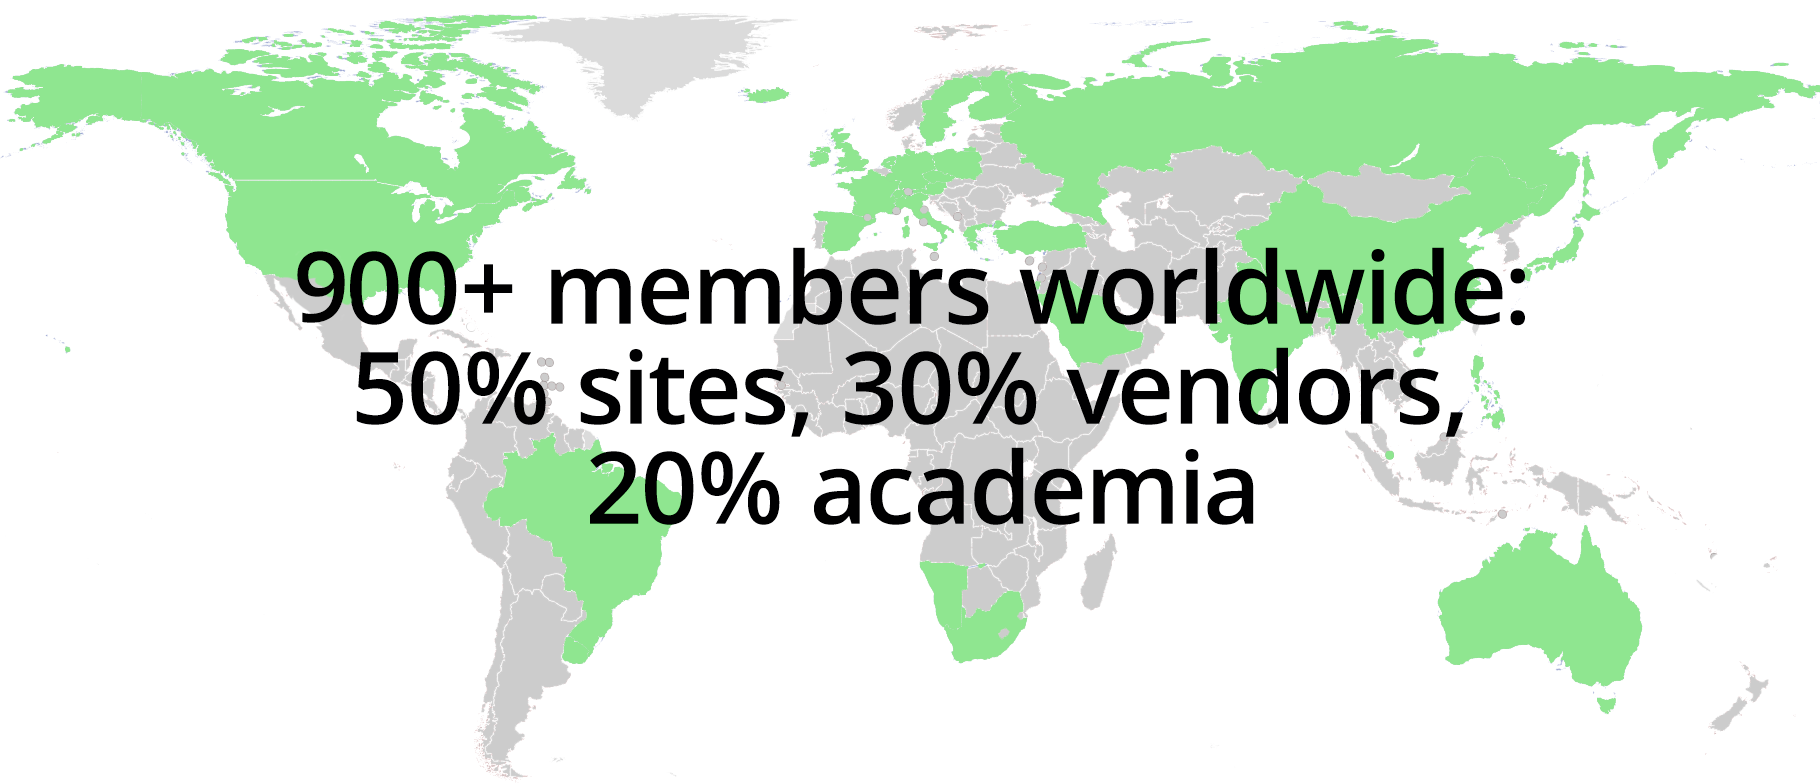 map of location of members with overlay text "900+ members worldwide: 50% sites, 30% vendors, 20% academia"